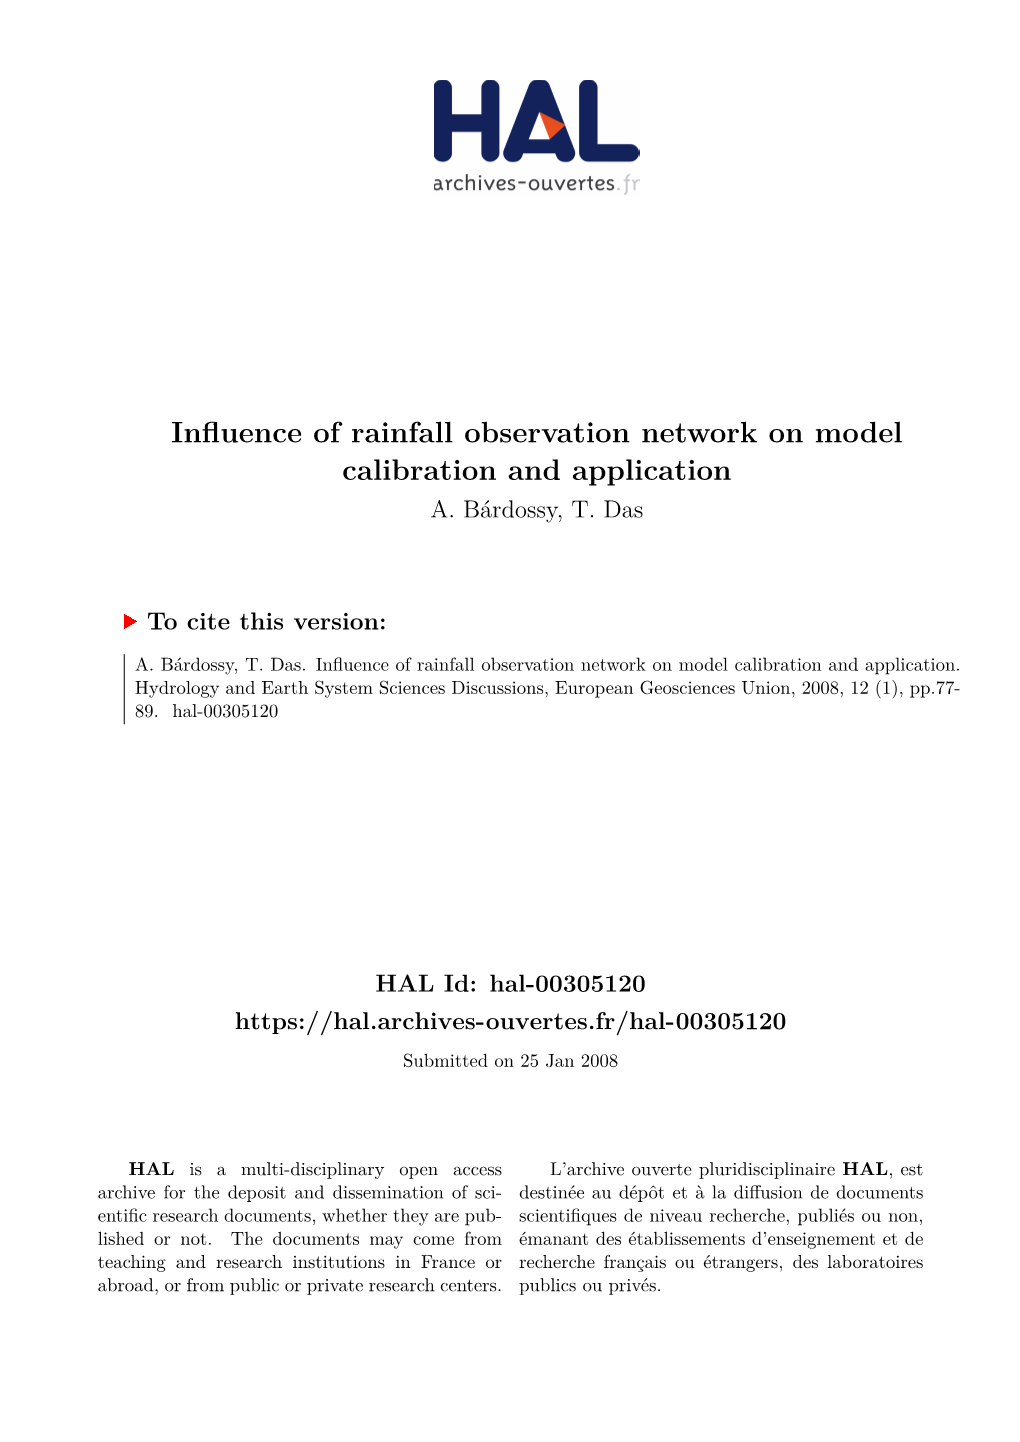 Influence of Rainfall Observation Network on Model Calibration and Application A